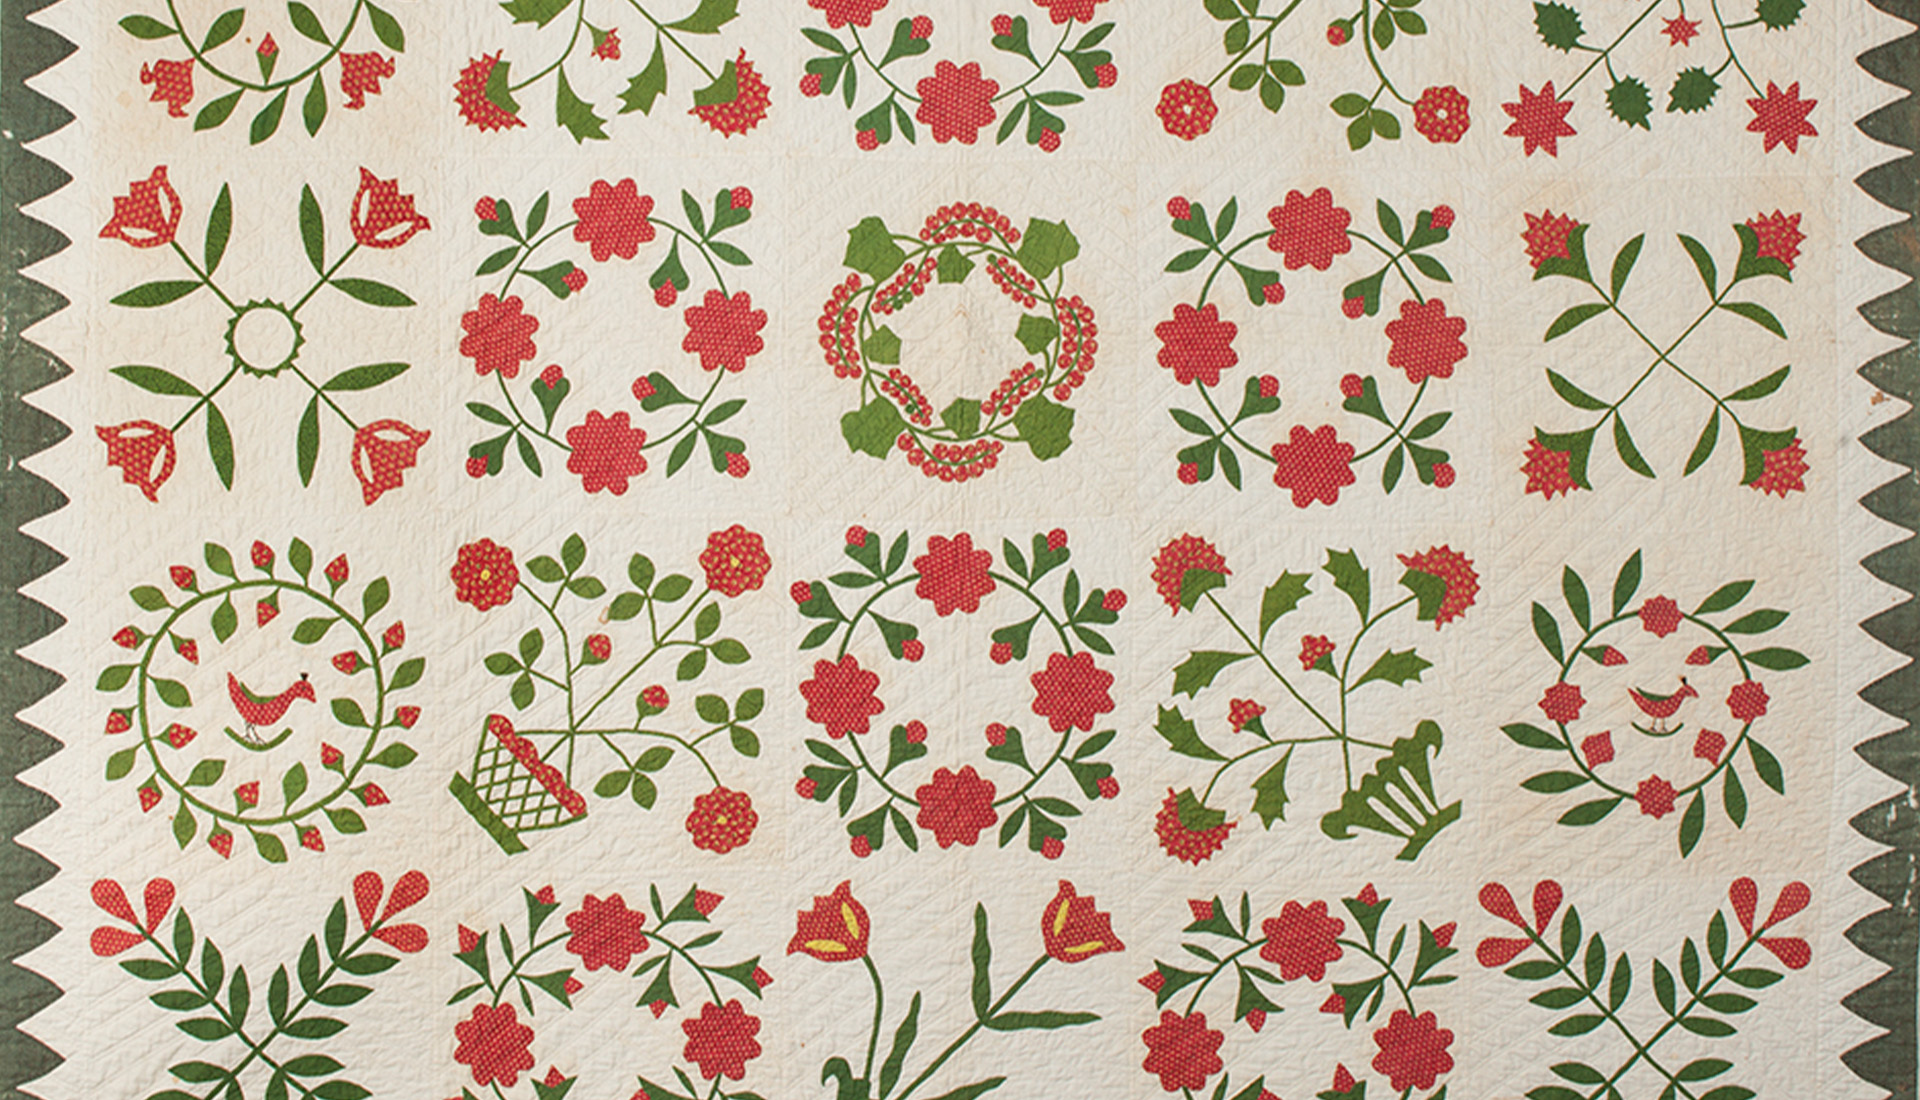 Mary Guyton (Hartford County, Maryland, United States of America), c. 1840-1953. Cotton Quilt, 93 3/4 in x 94 in. MESDA.